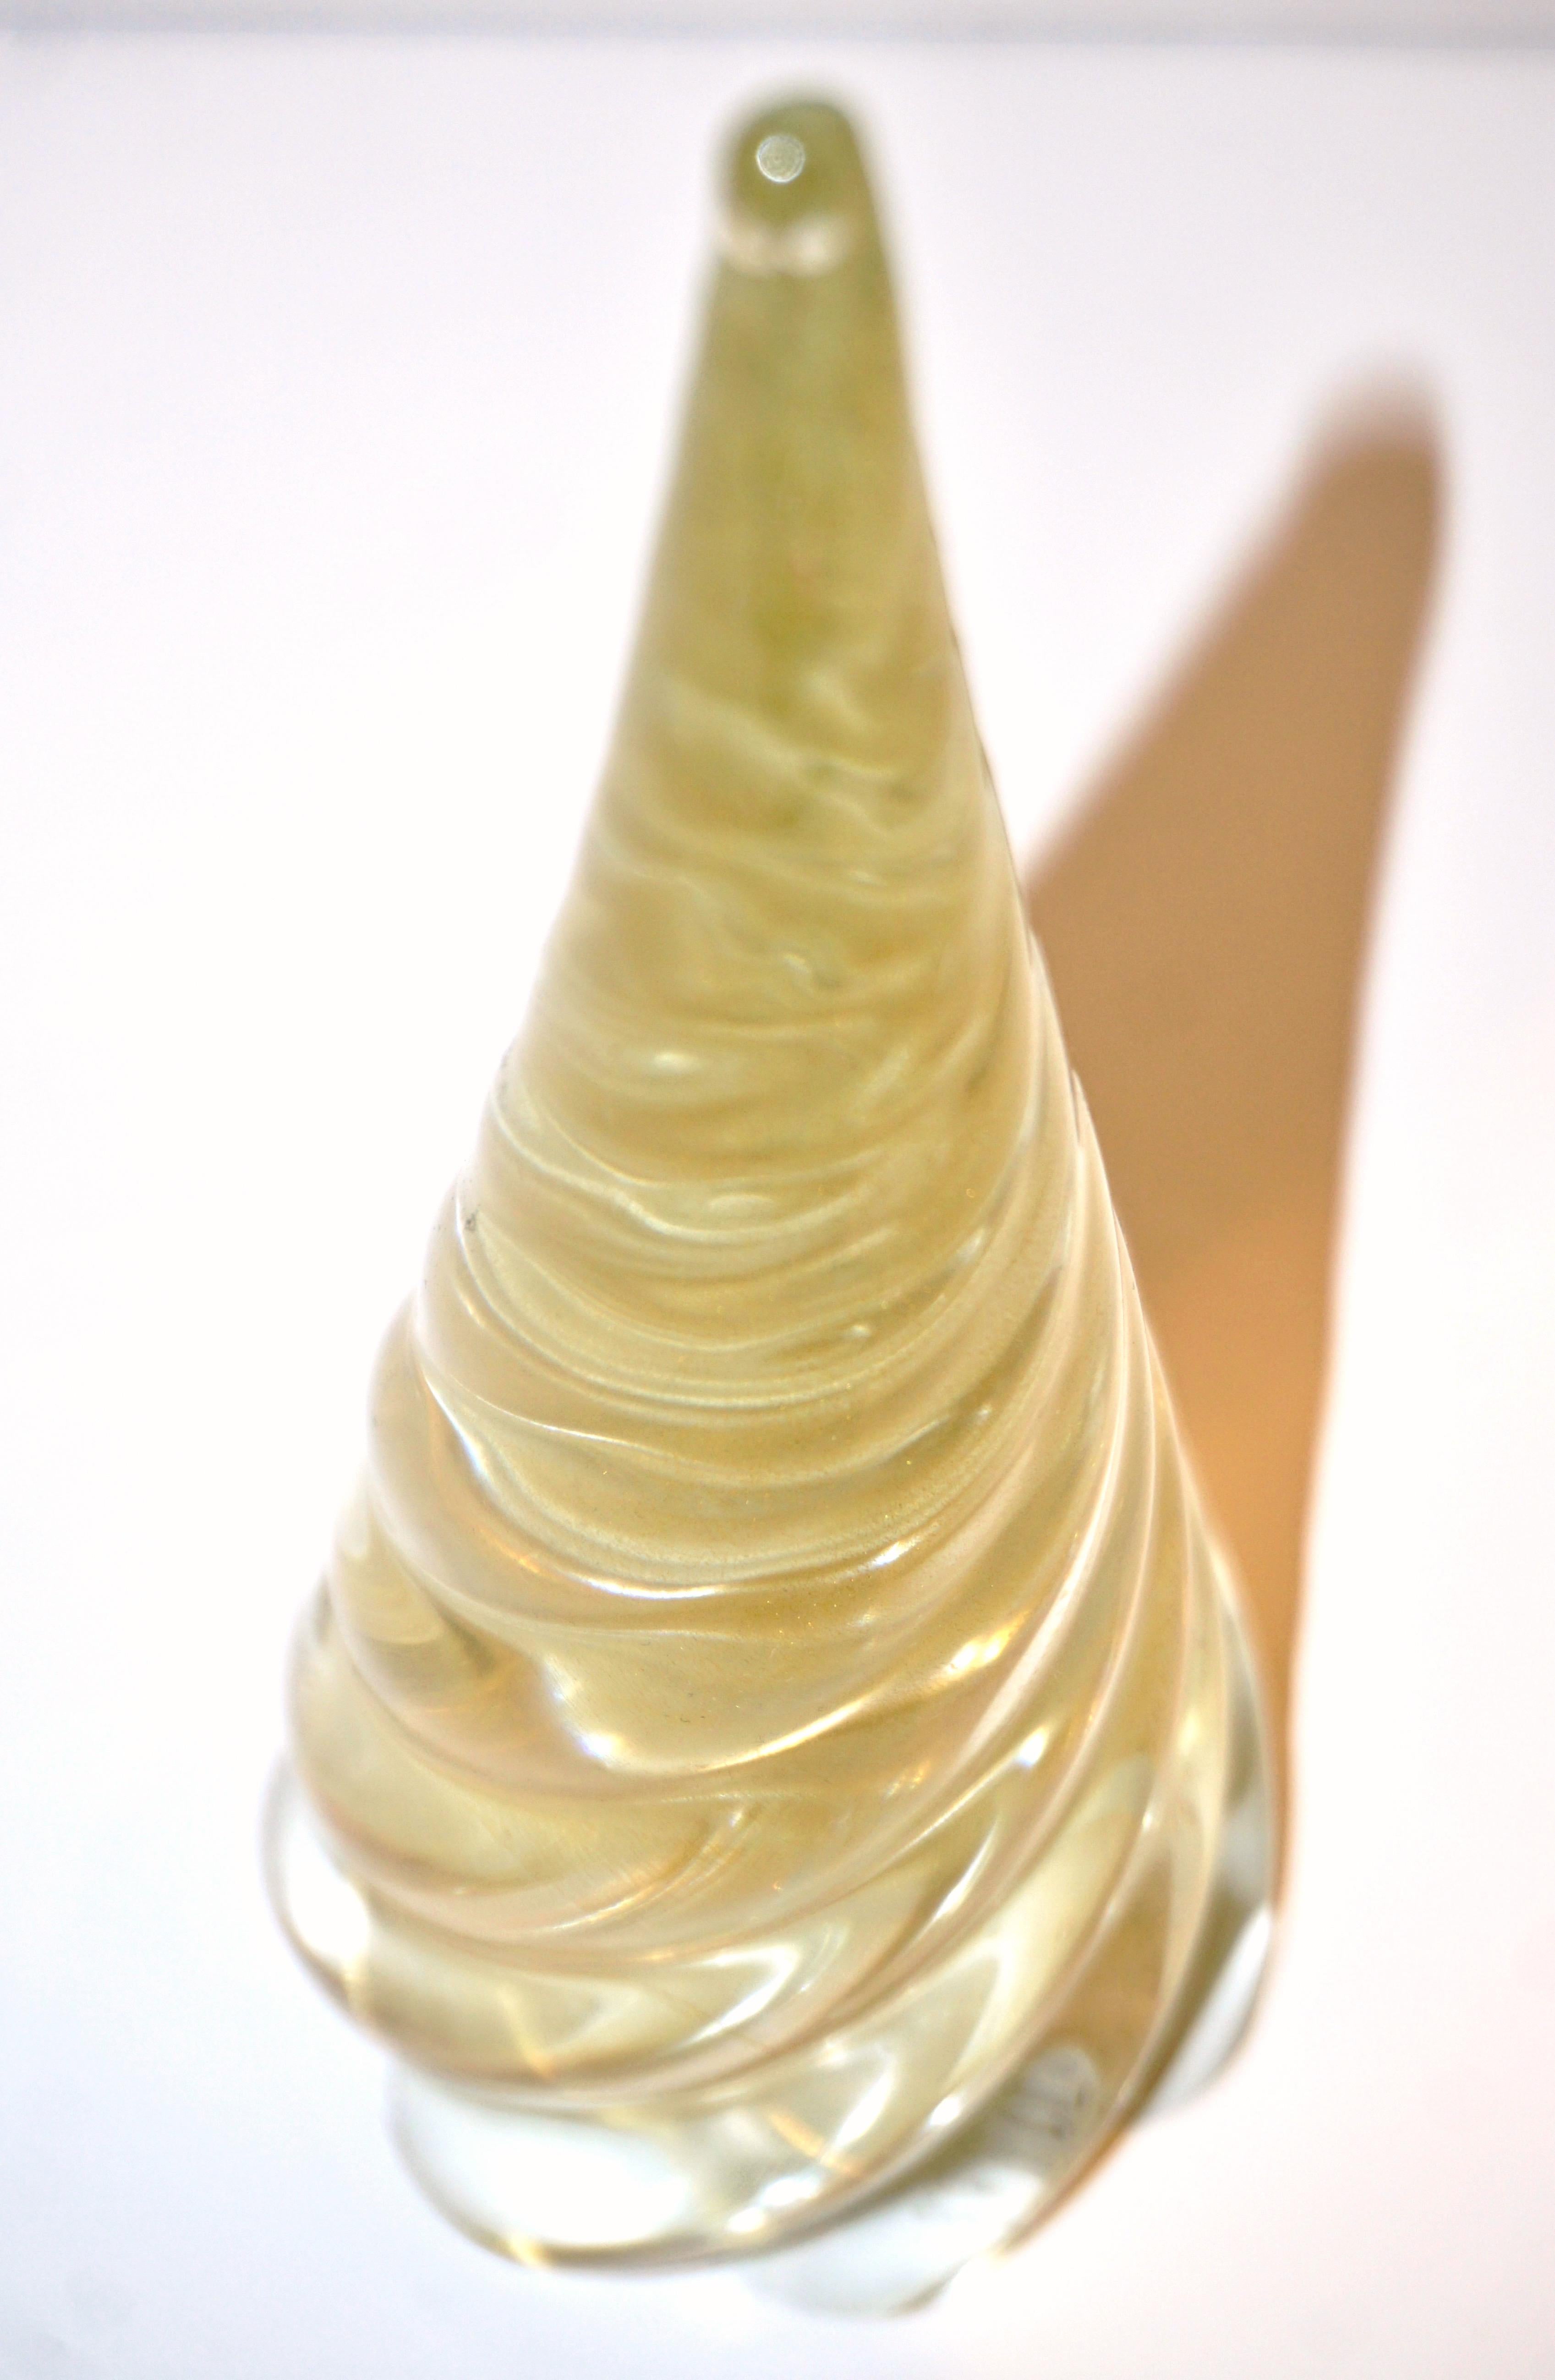 Italian crystal glass tree ornament of organic sleek modern design, a vintage creation part of a collection assembled signed by Cenedese. Individually mouth-blown and handcrafted. Made precious by the use of extensive pure 24-karat gold incased in